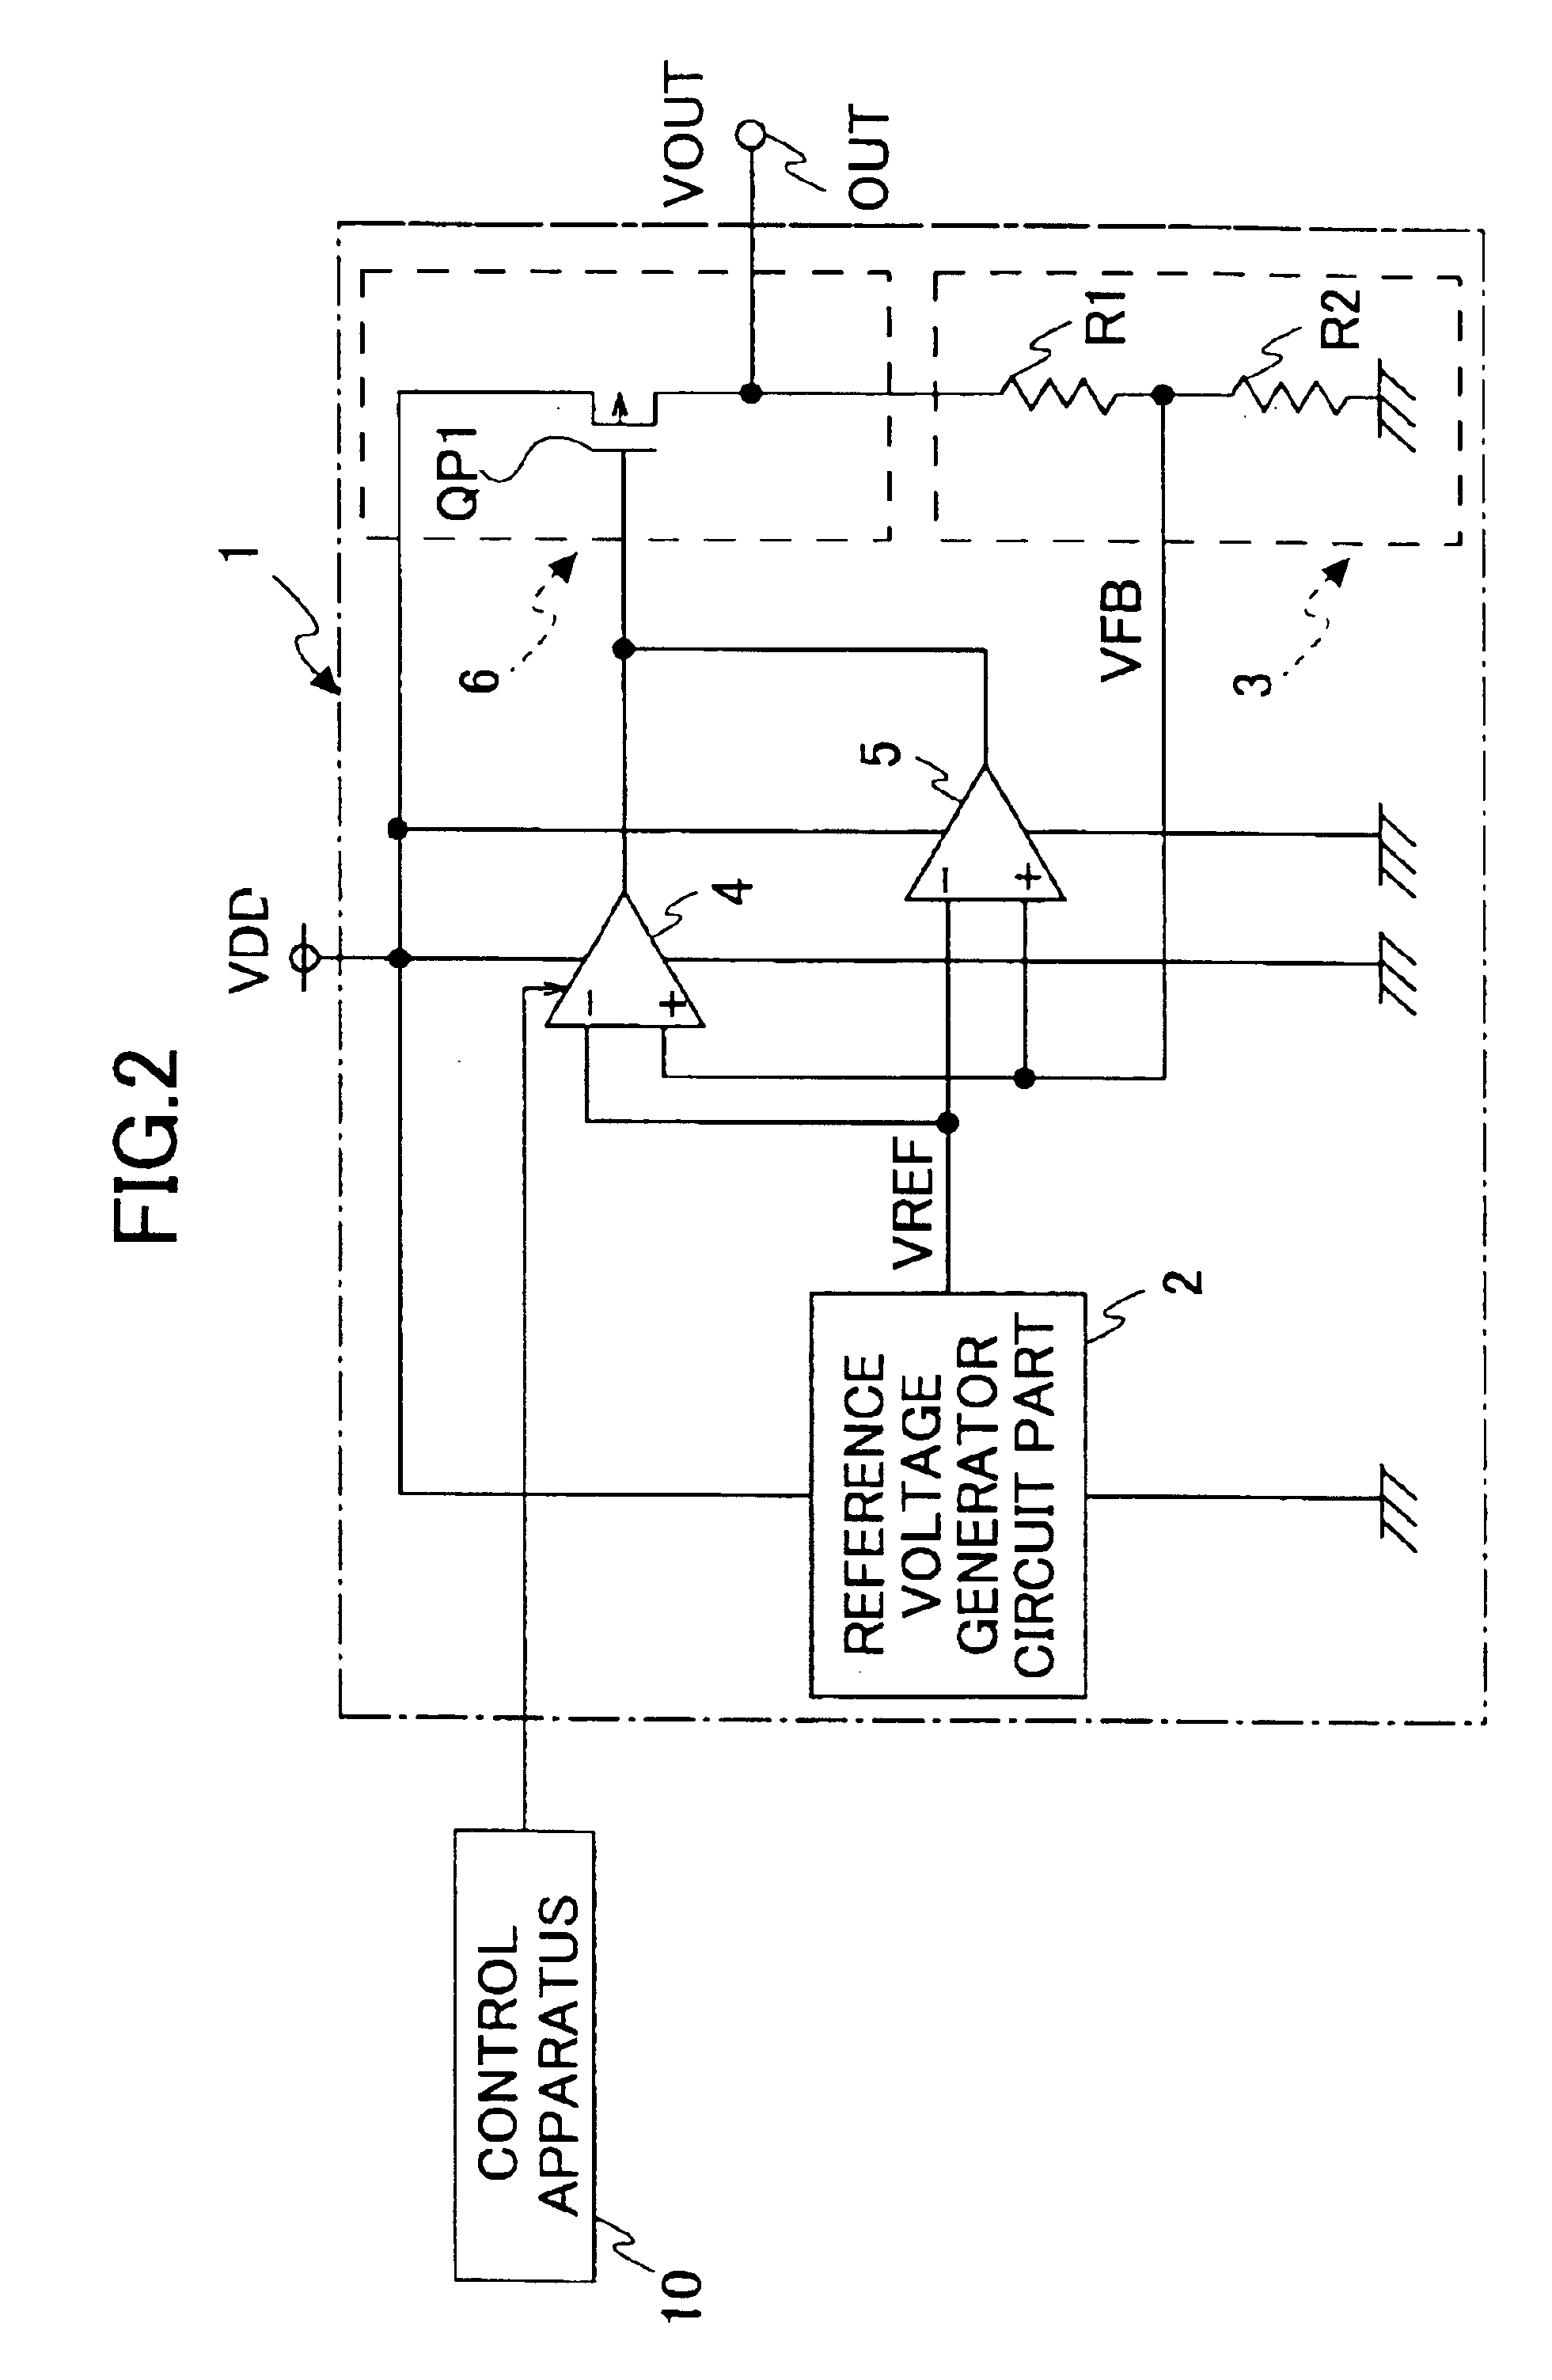 Voltage regulator using two operational amplifiers in current consumption